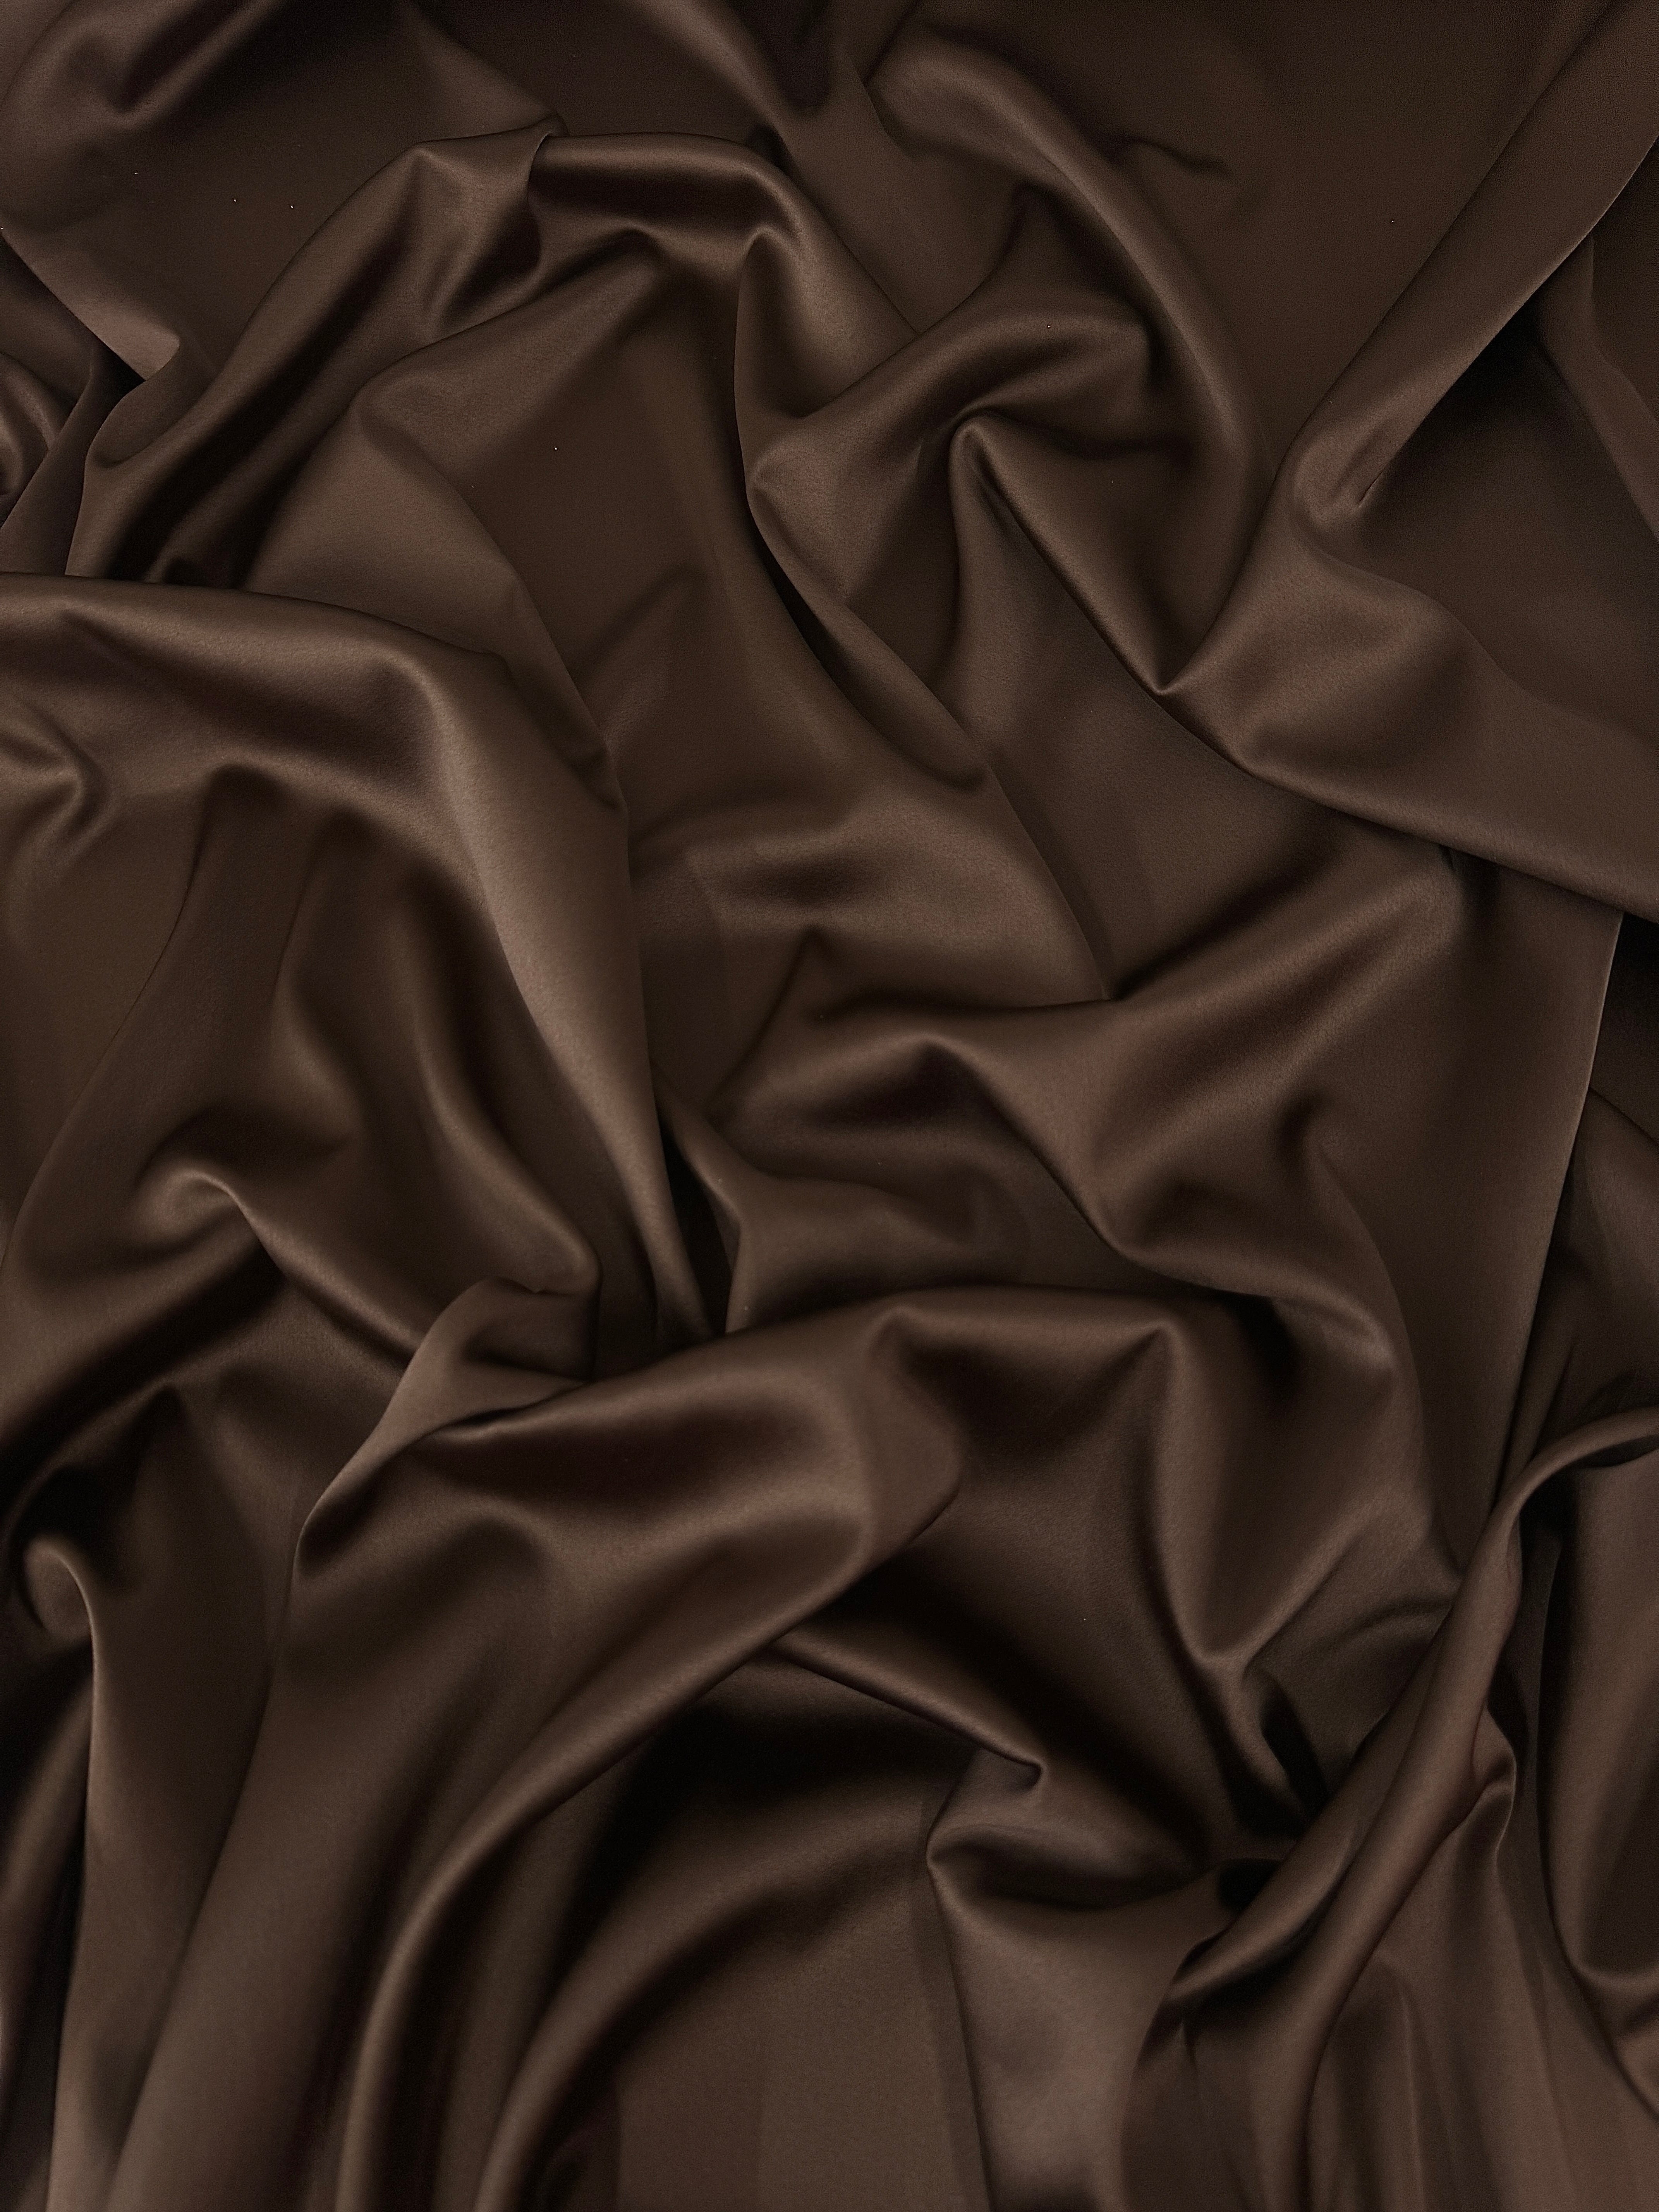 Chocolate Brown Stretch Crepe Back Satin, brown stretch crepe back satin, dark brown stretch crepe back satin, premium stretch crepe back satin, satin for bride, satin for woman, satin in low price, cheap satin, satin on sale